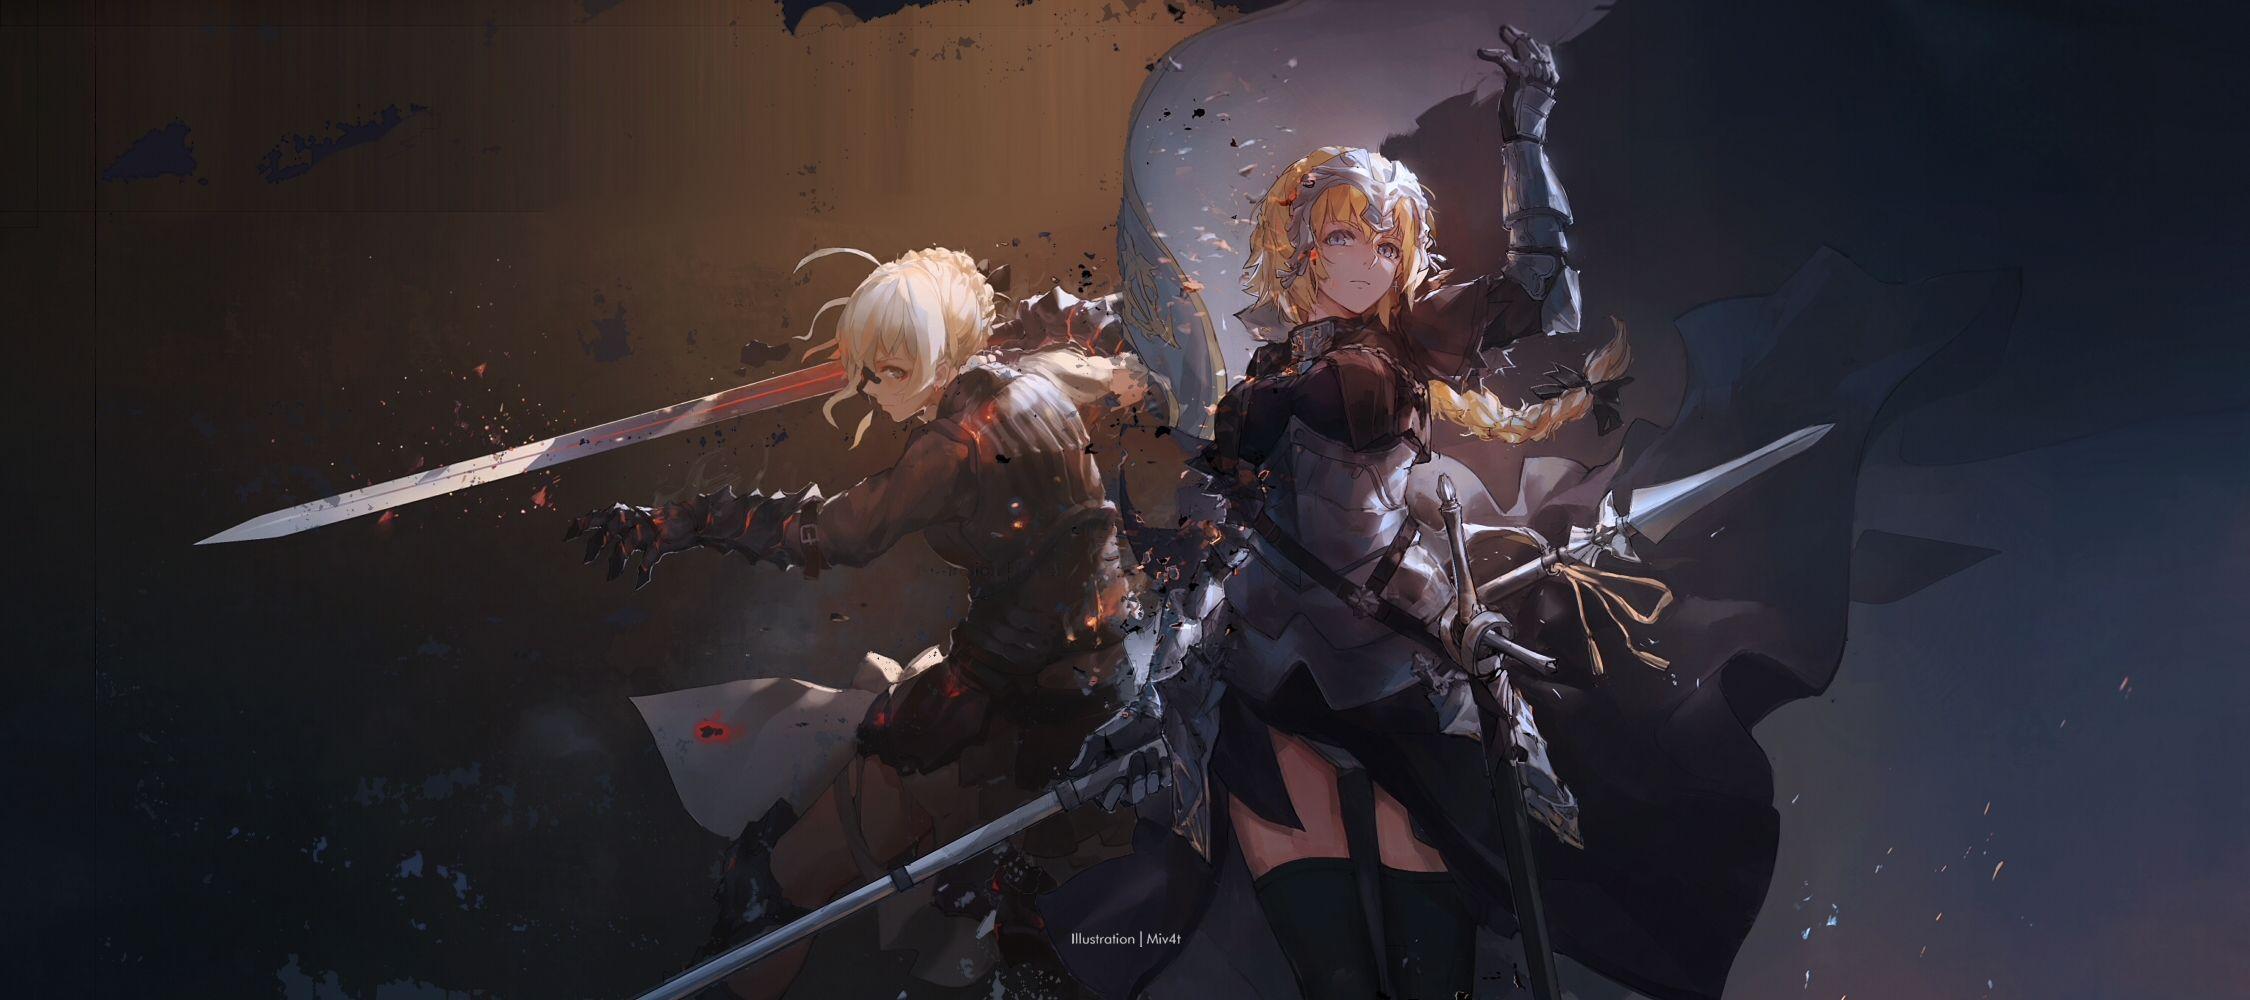 Wallpaper Fate Stay Night, Saber, Armored, Ruler, Fate Apocrypha